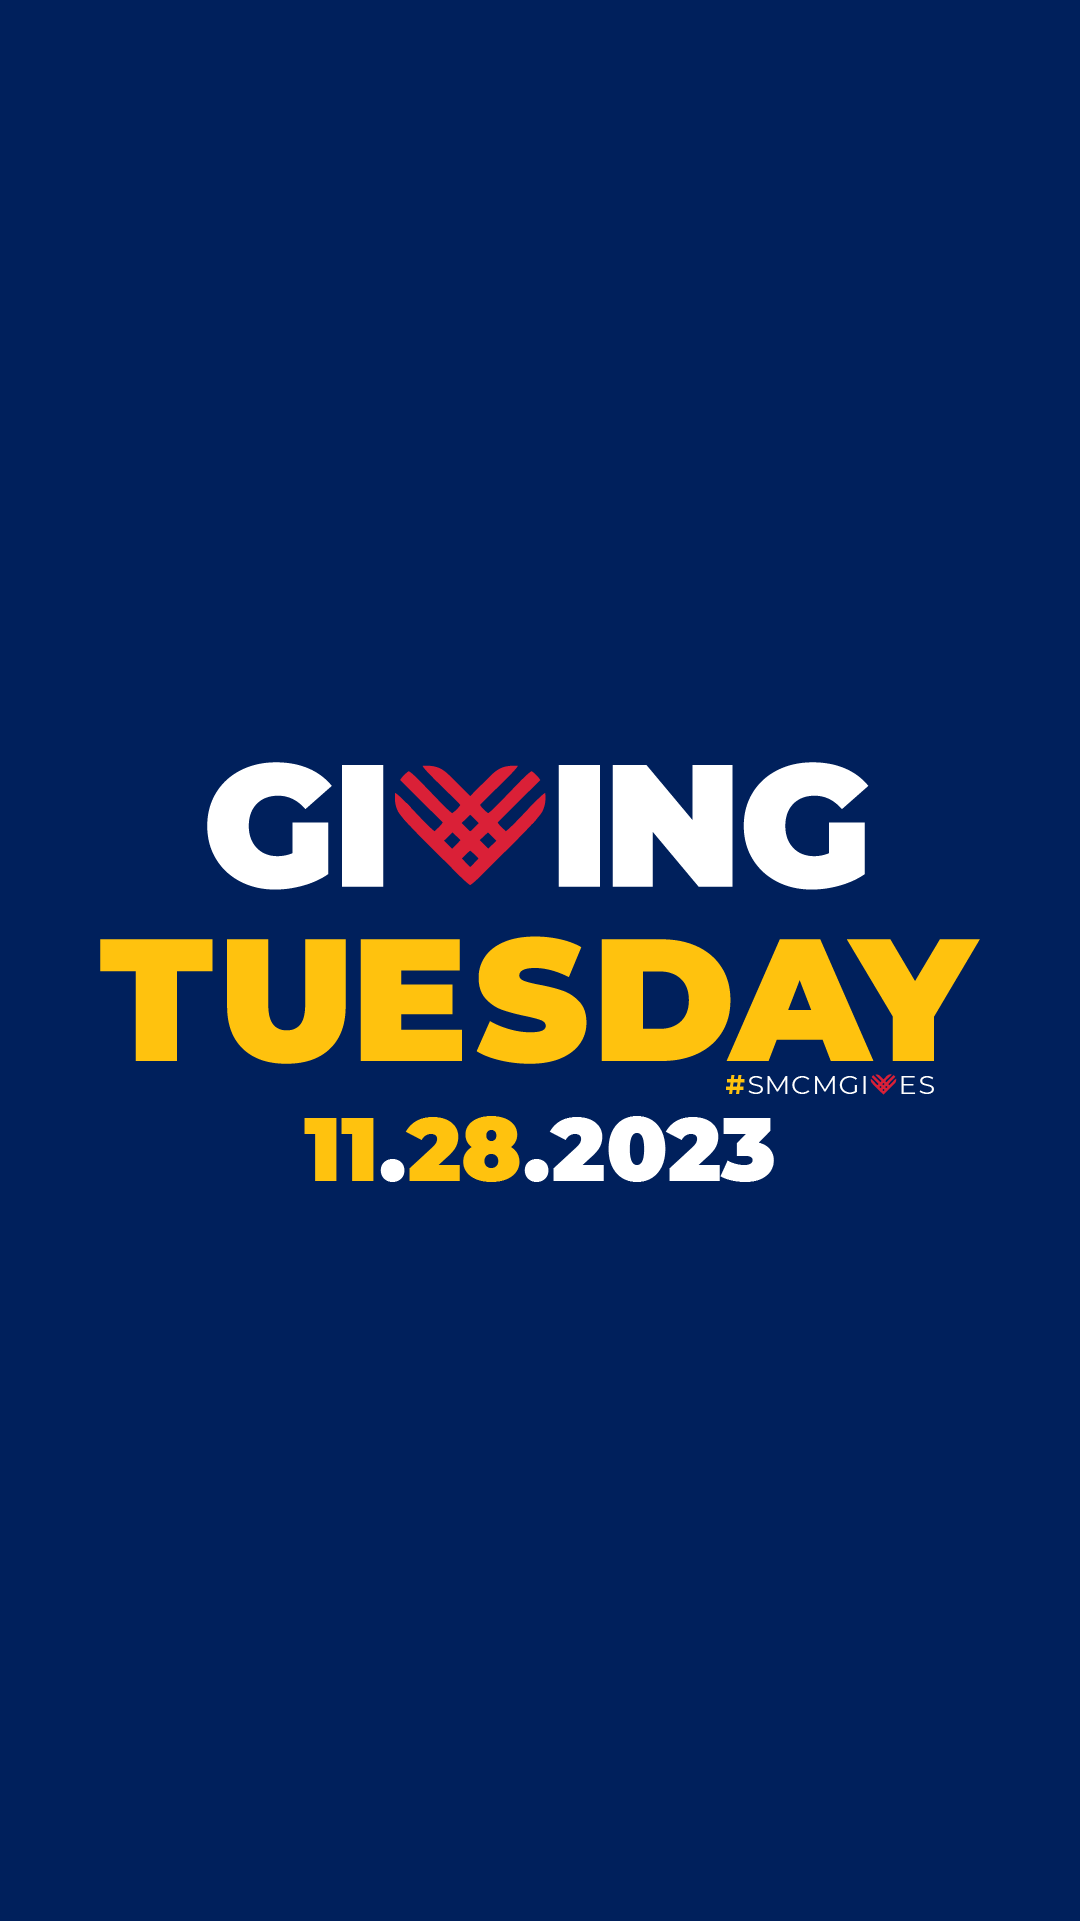 Save the Date, Giving Tuesday, #SMCMgives